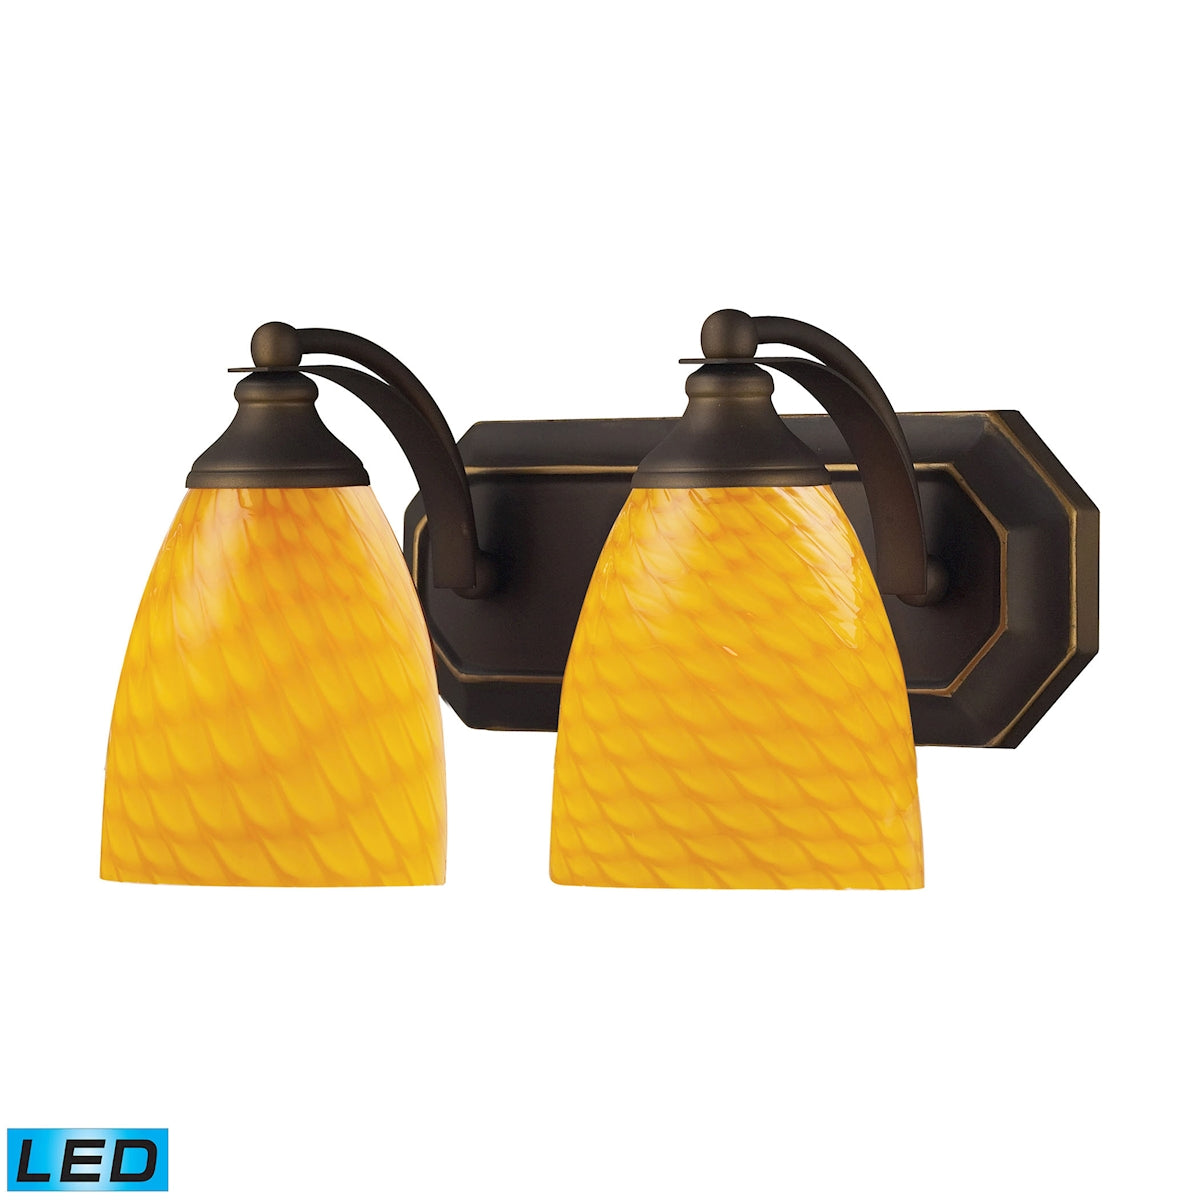 ELK Lighting 570-2B-CN-LED Mix-N-Match Vanity 2-Light Wall Lamp in Aged Bronze with Canary Glass - Includes LED Bulbs